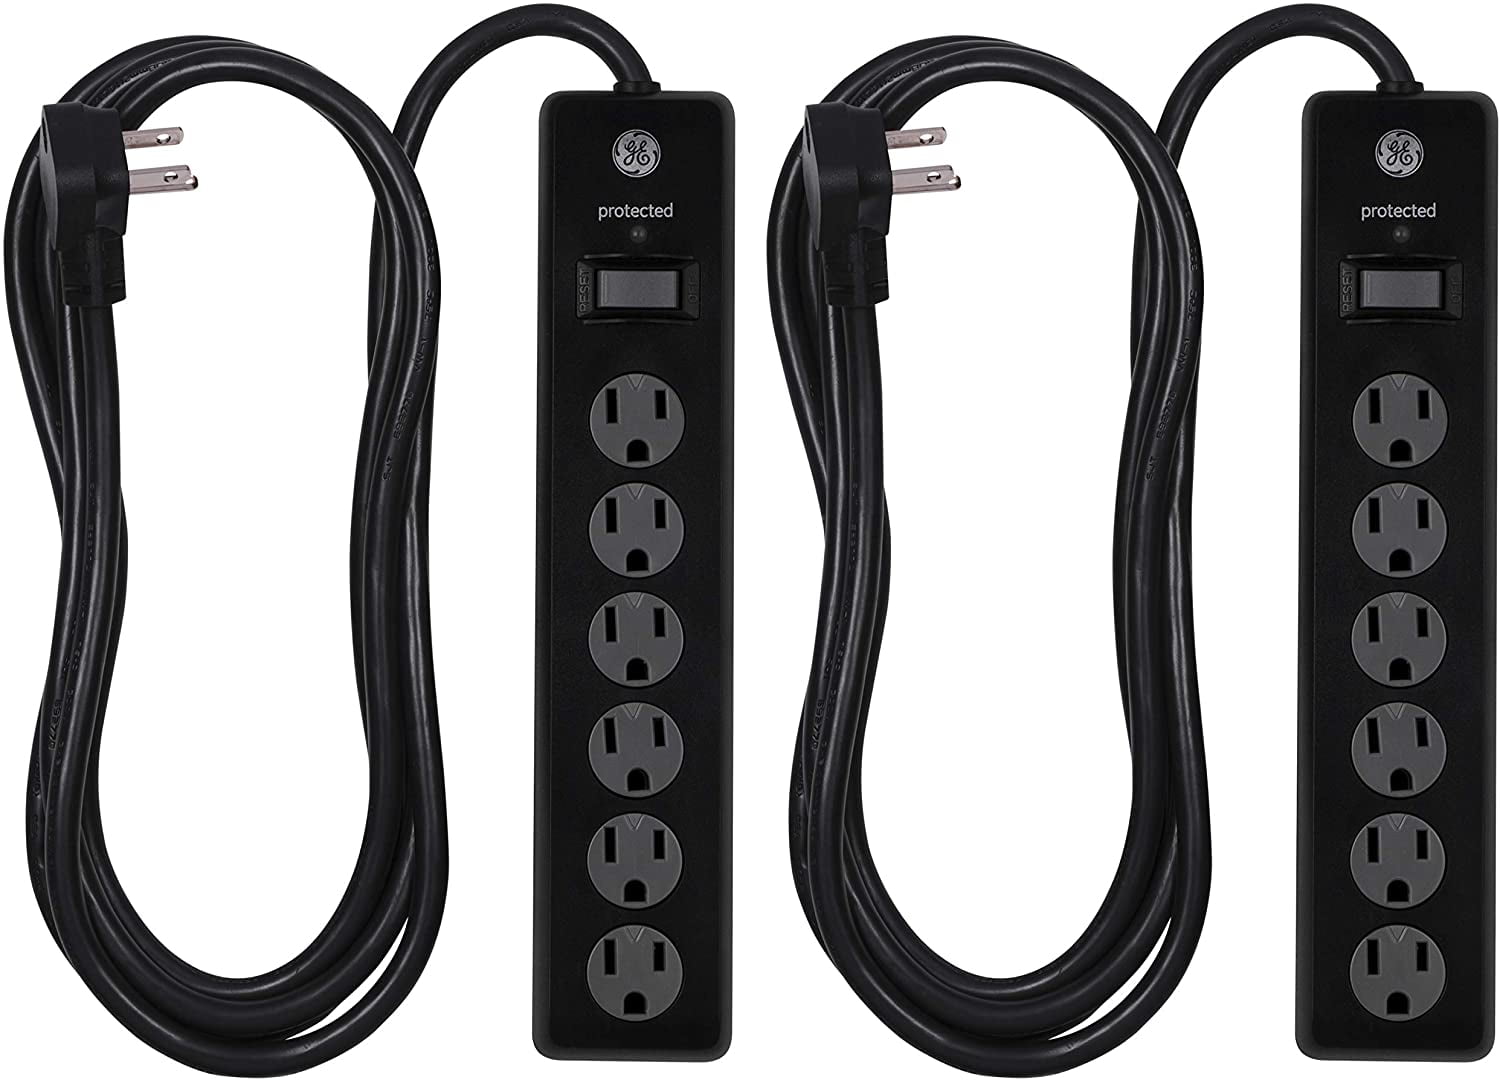 10 Ft Extension Cord 54646 600 Joules Twist-to-Close Safety Covers Black Power Strip GE 6 Outlet Surge Protector 2 Pack 